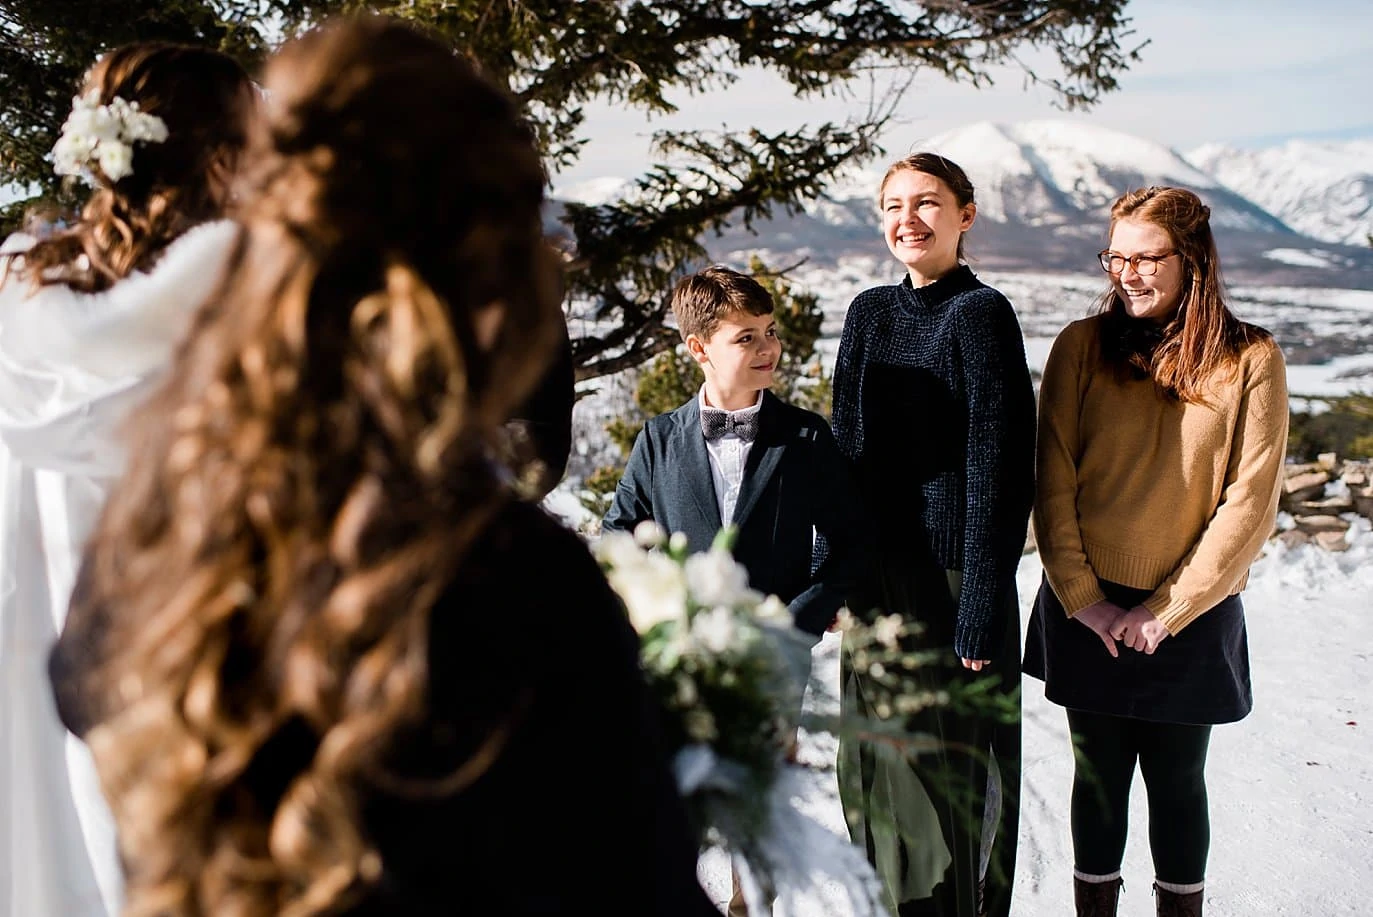 wedding ceremony with kids at Sapphire Point Elopement by Breckenridge wedding photographer Jennie Crate Photographer